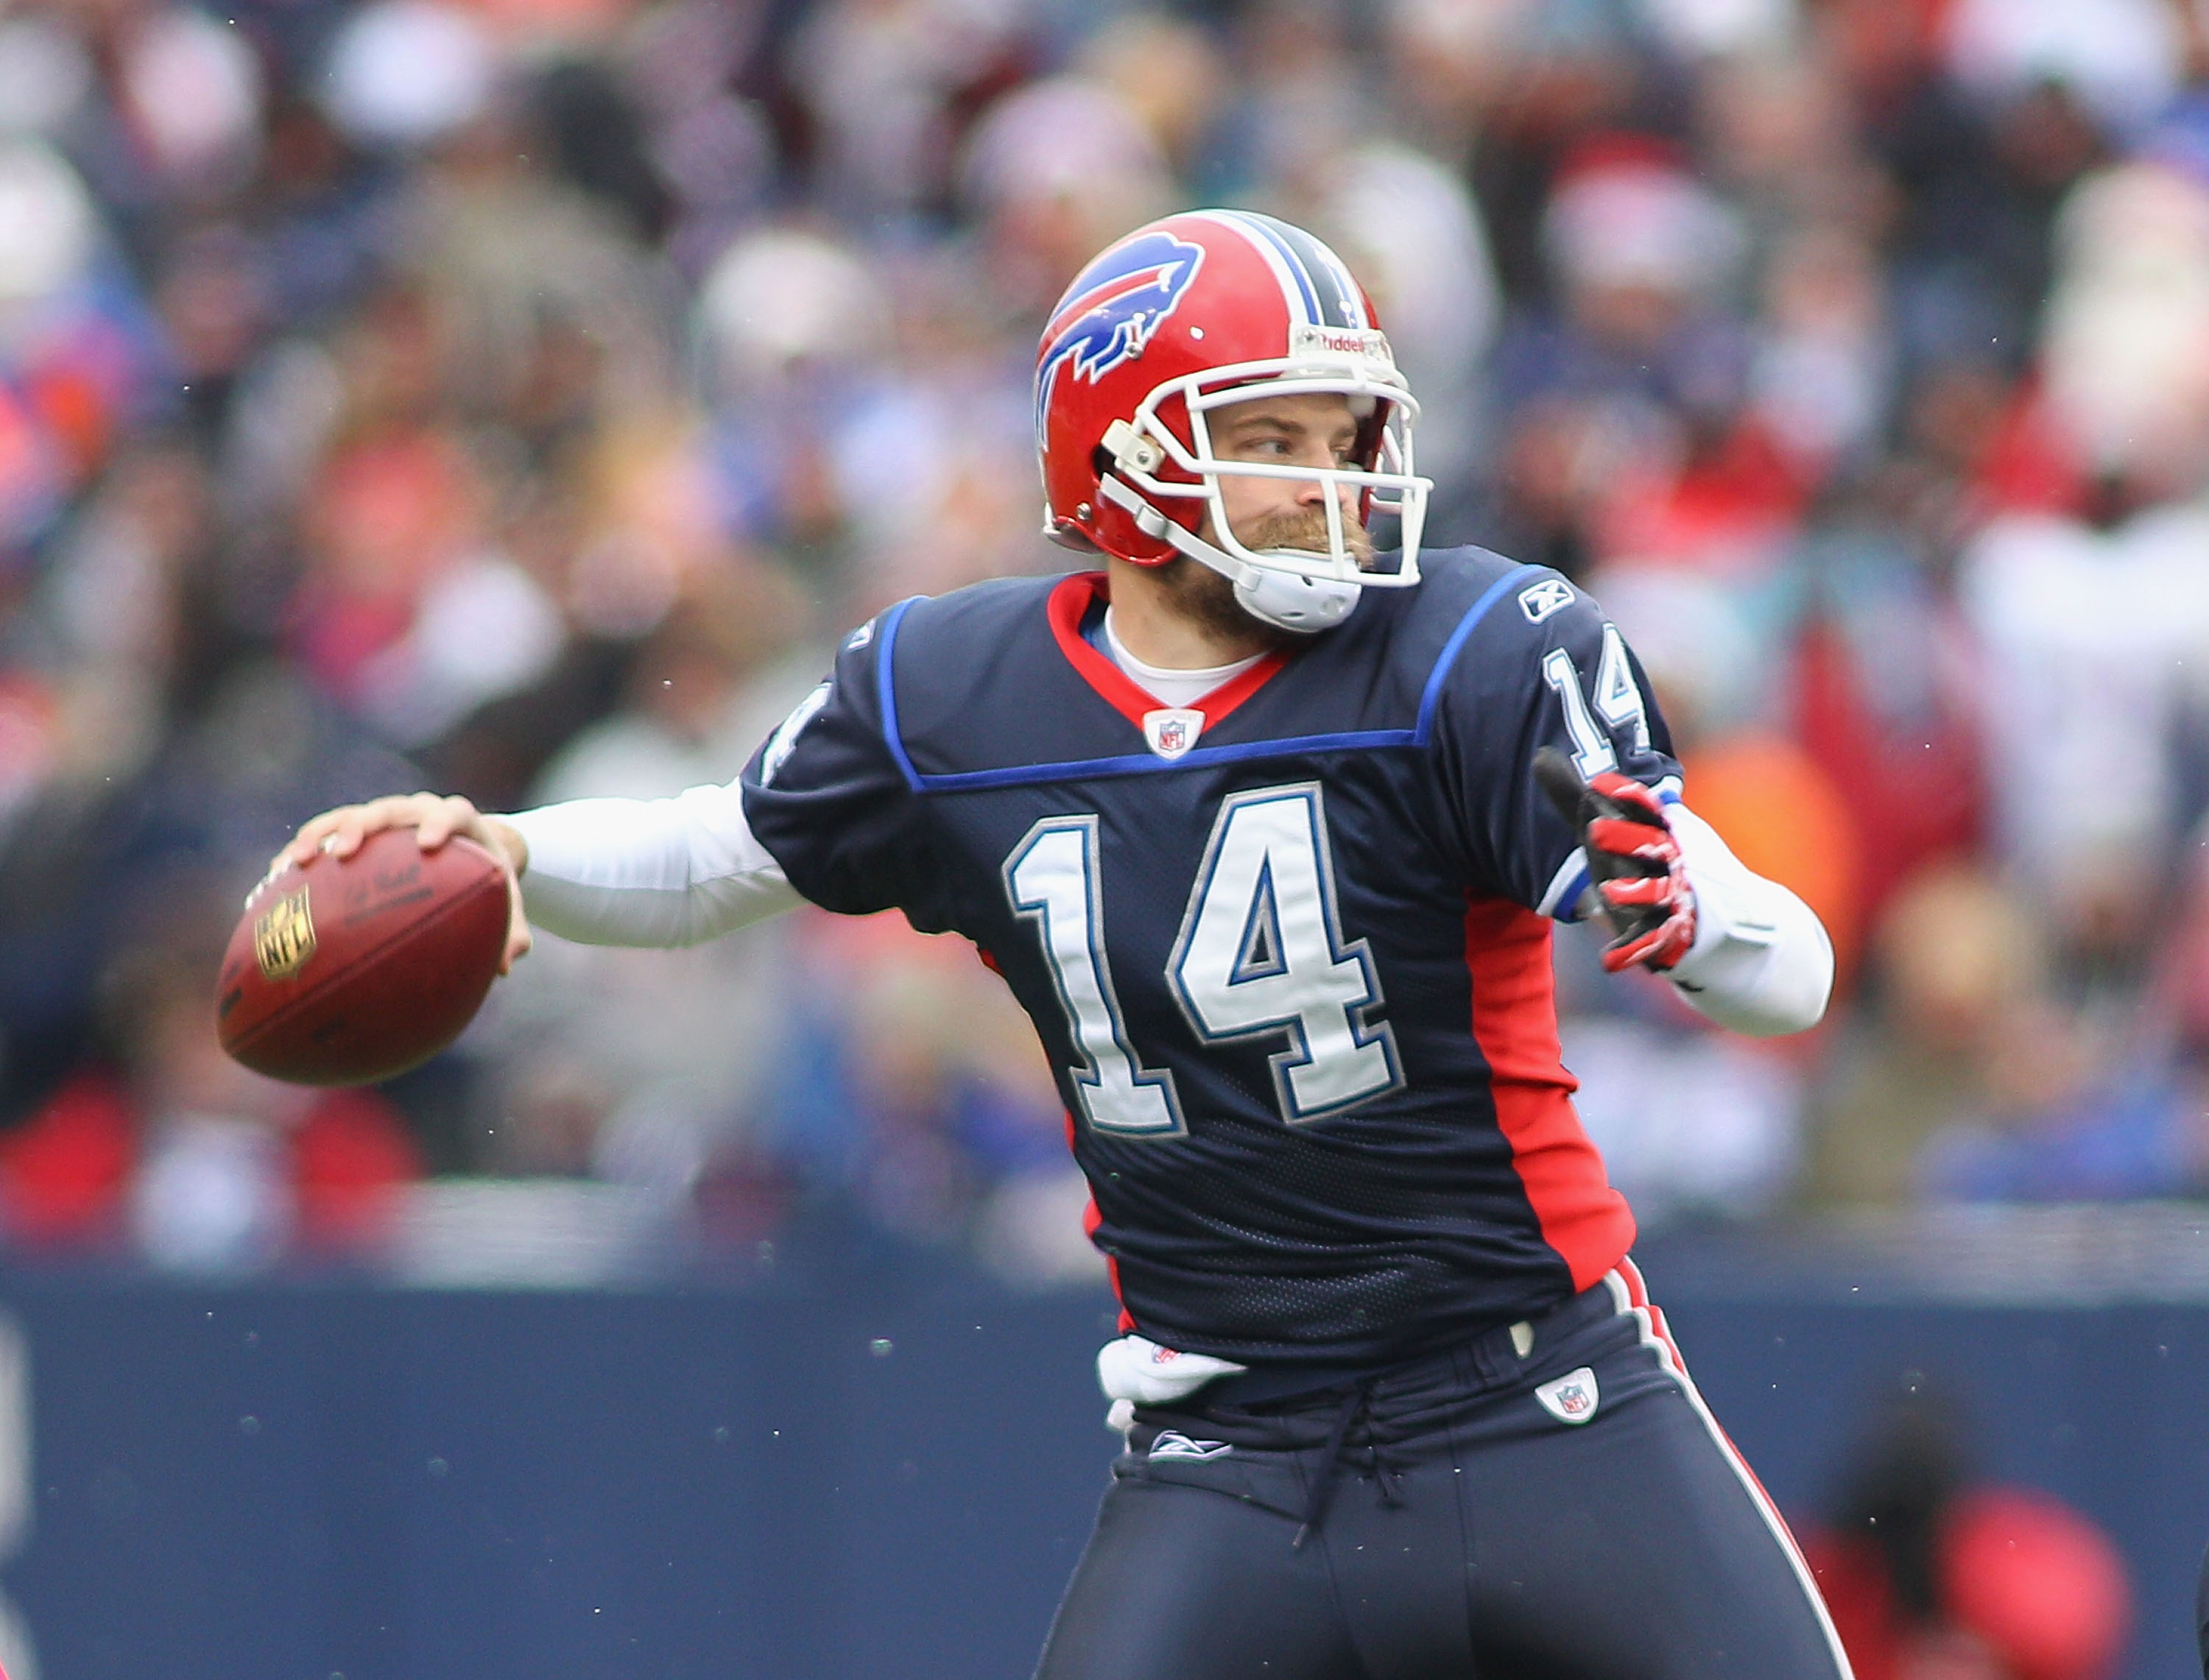 ORCHARD PARK, NY - DECEMBER 26:  Ryan Fitzpatrick #14 of the Buffalo Bills readies to pass against the New England Patriots at Ralph Wilson Stadium on December 26, 2010 in Orchard Park, New York.  (Photo by Rick Stewart/Getty Images)